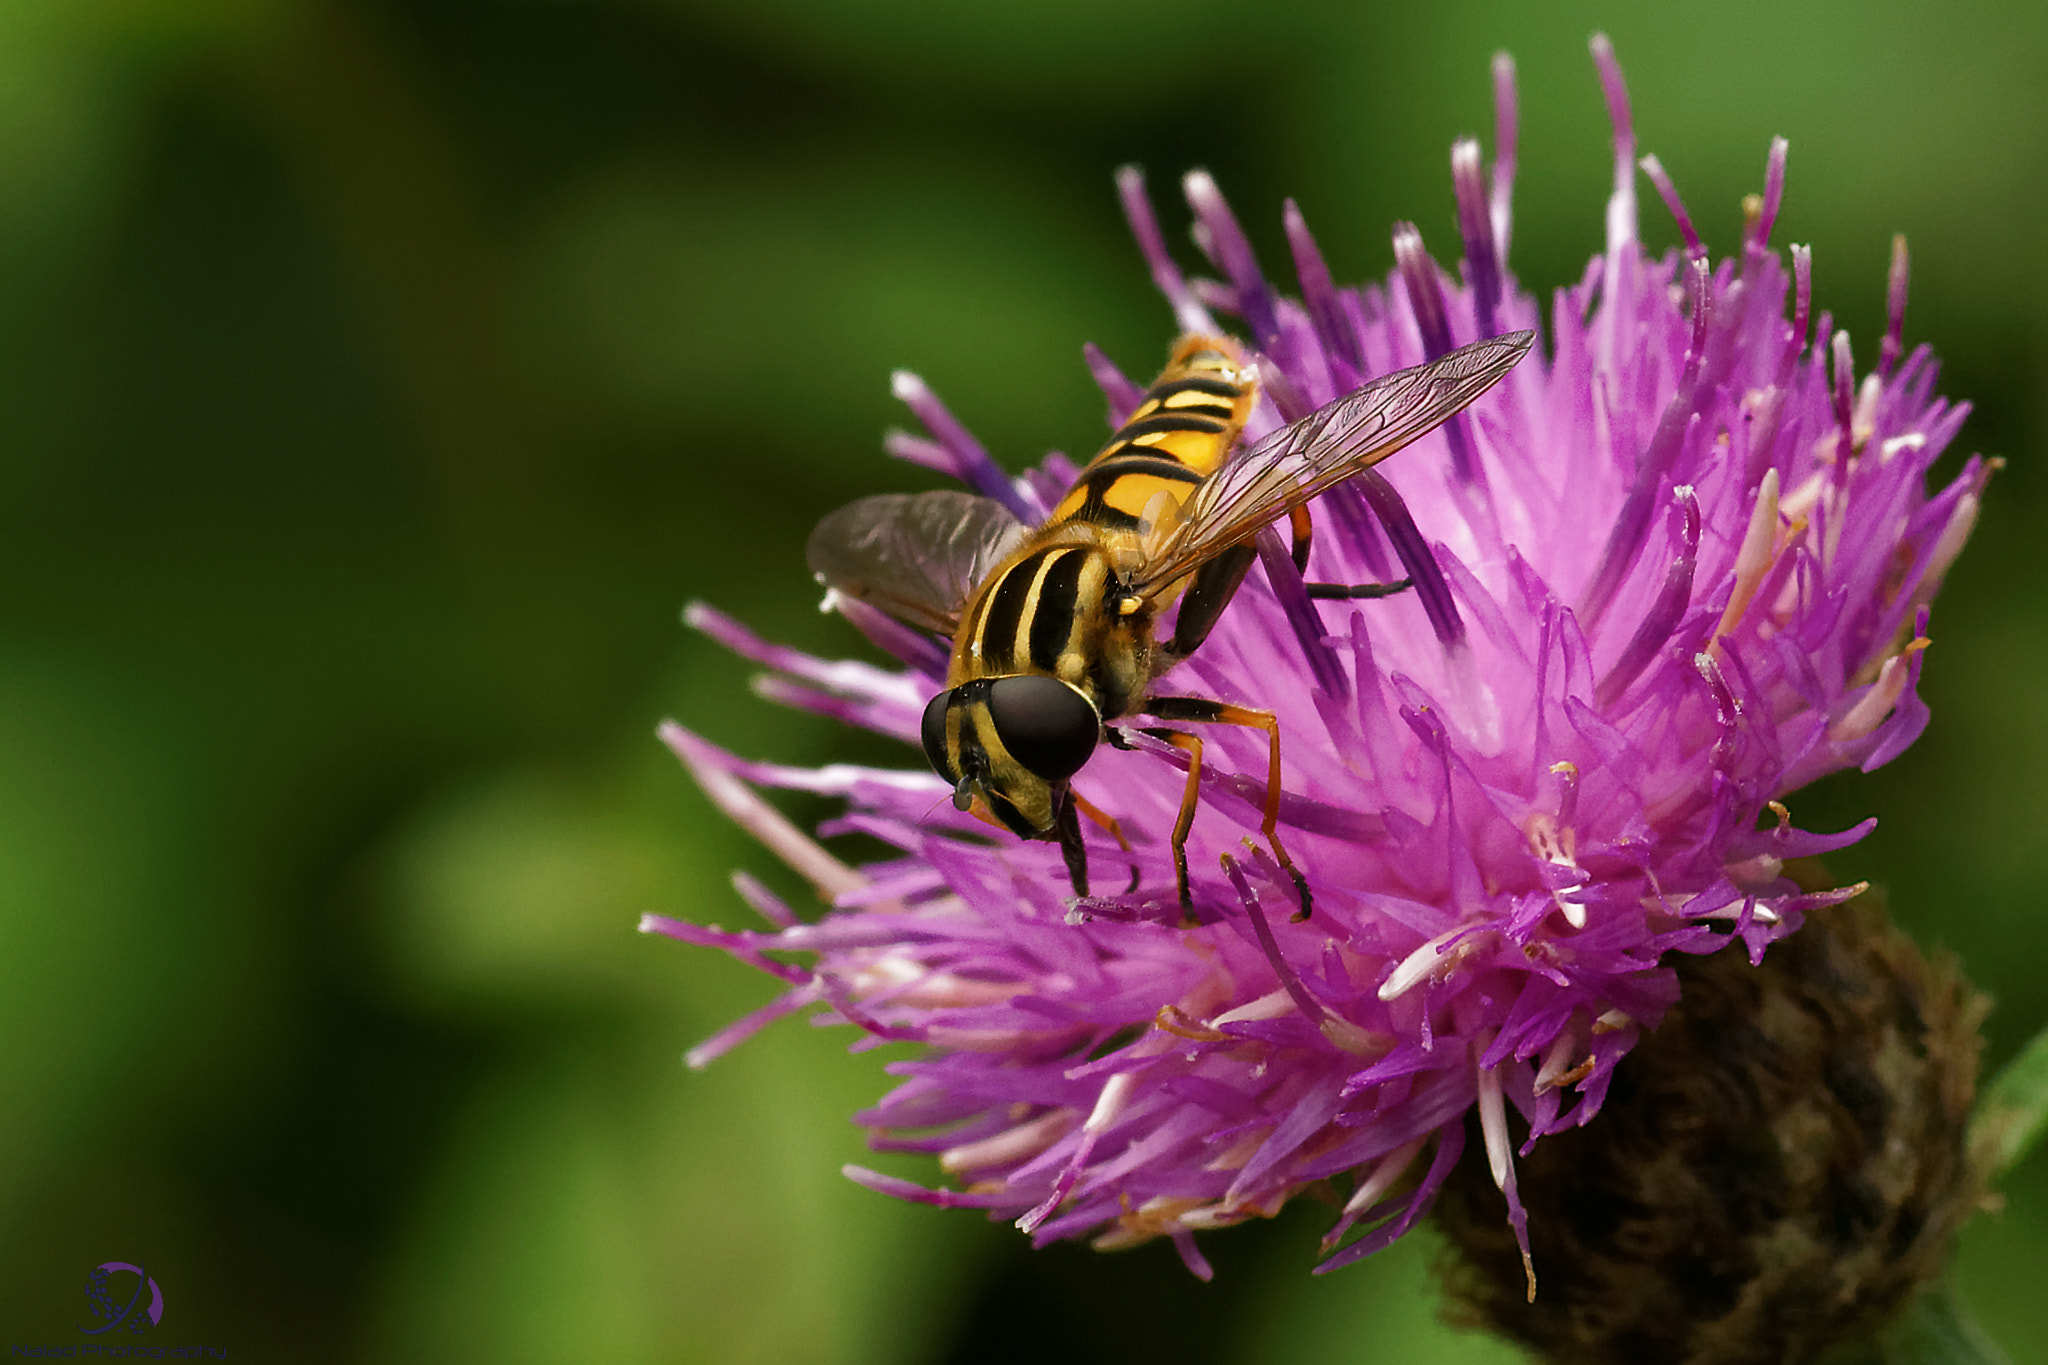 Sony a99 II sample photo. Hoverfly on a flower photography